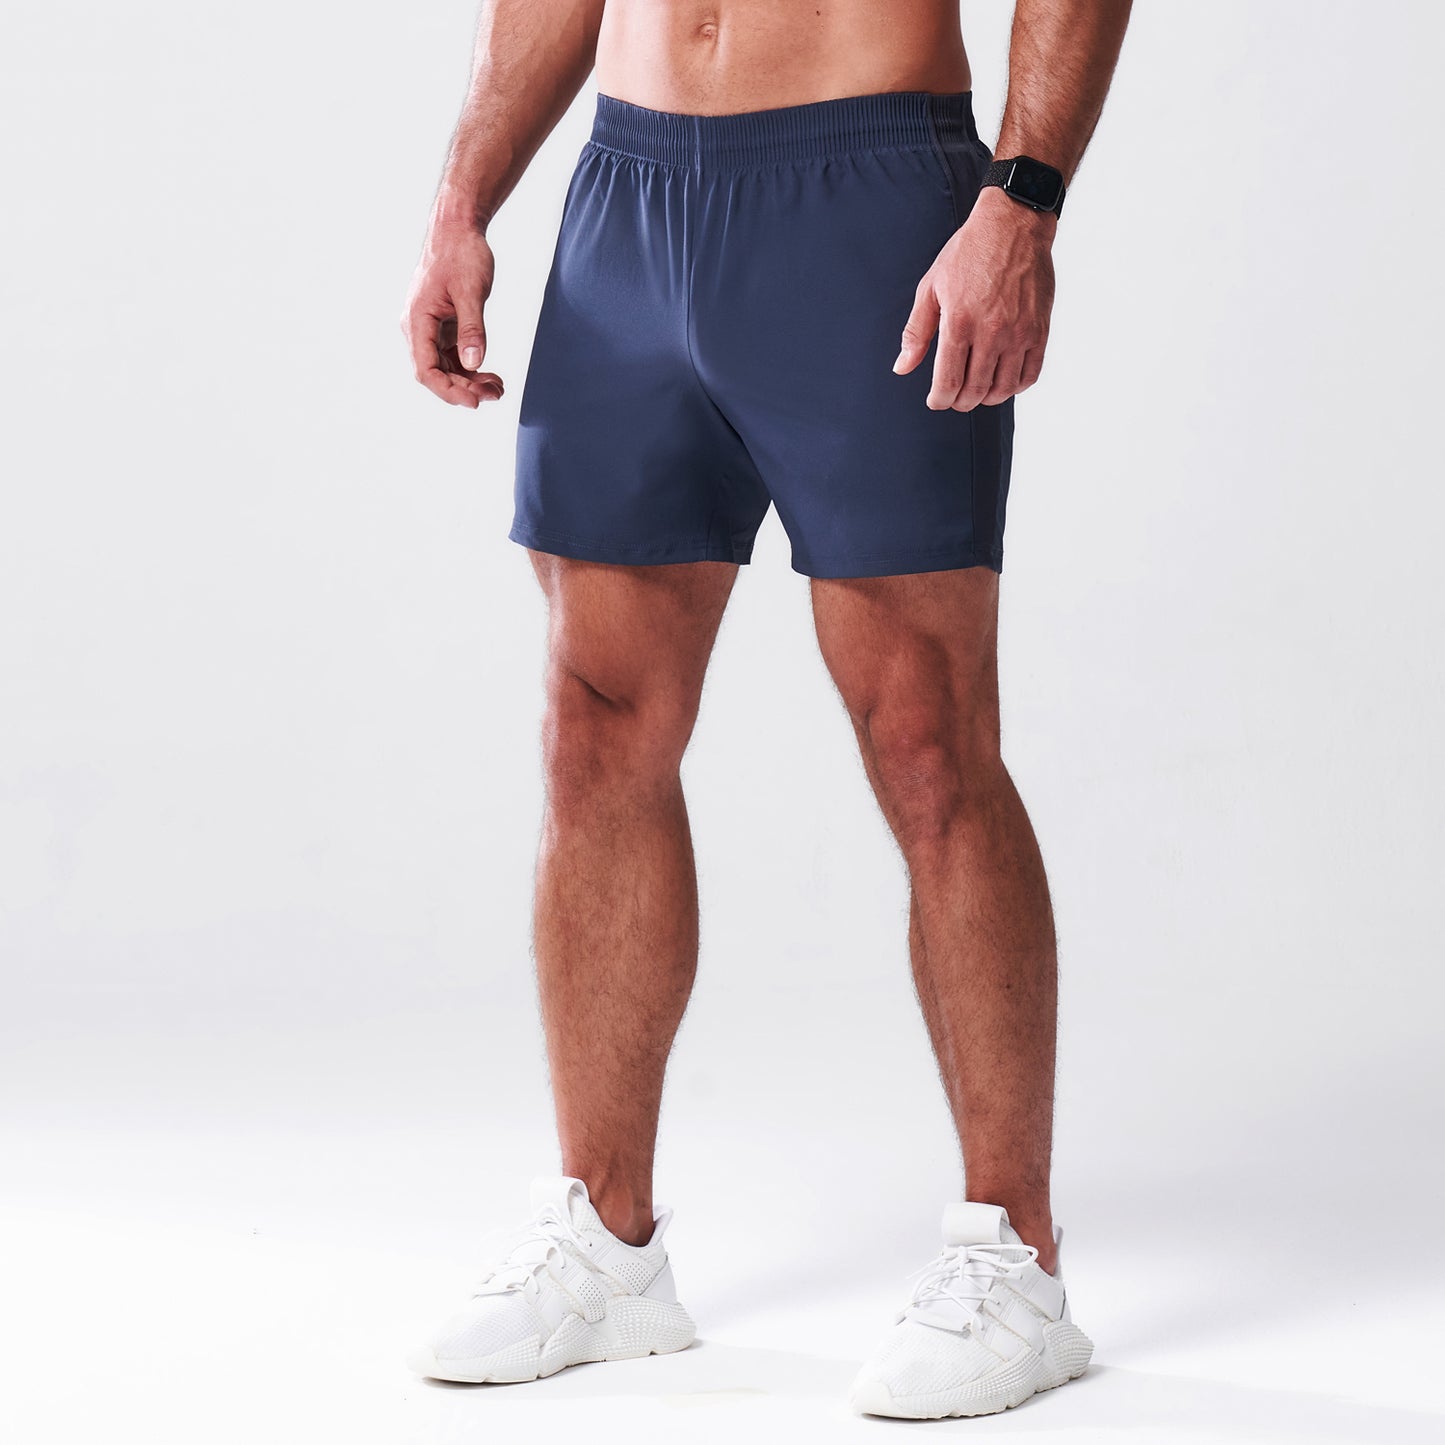 squatwolf-gym-wear-lab360-5-impact-shorts-india-ink-workout-short-for-men